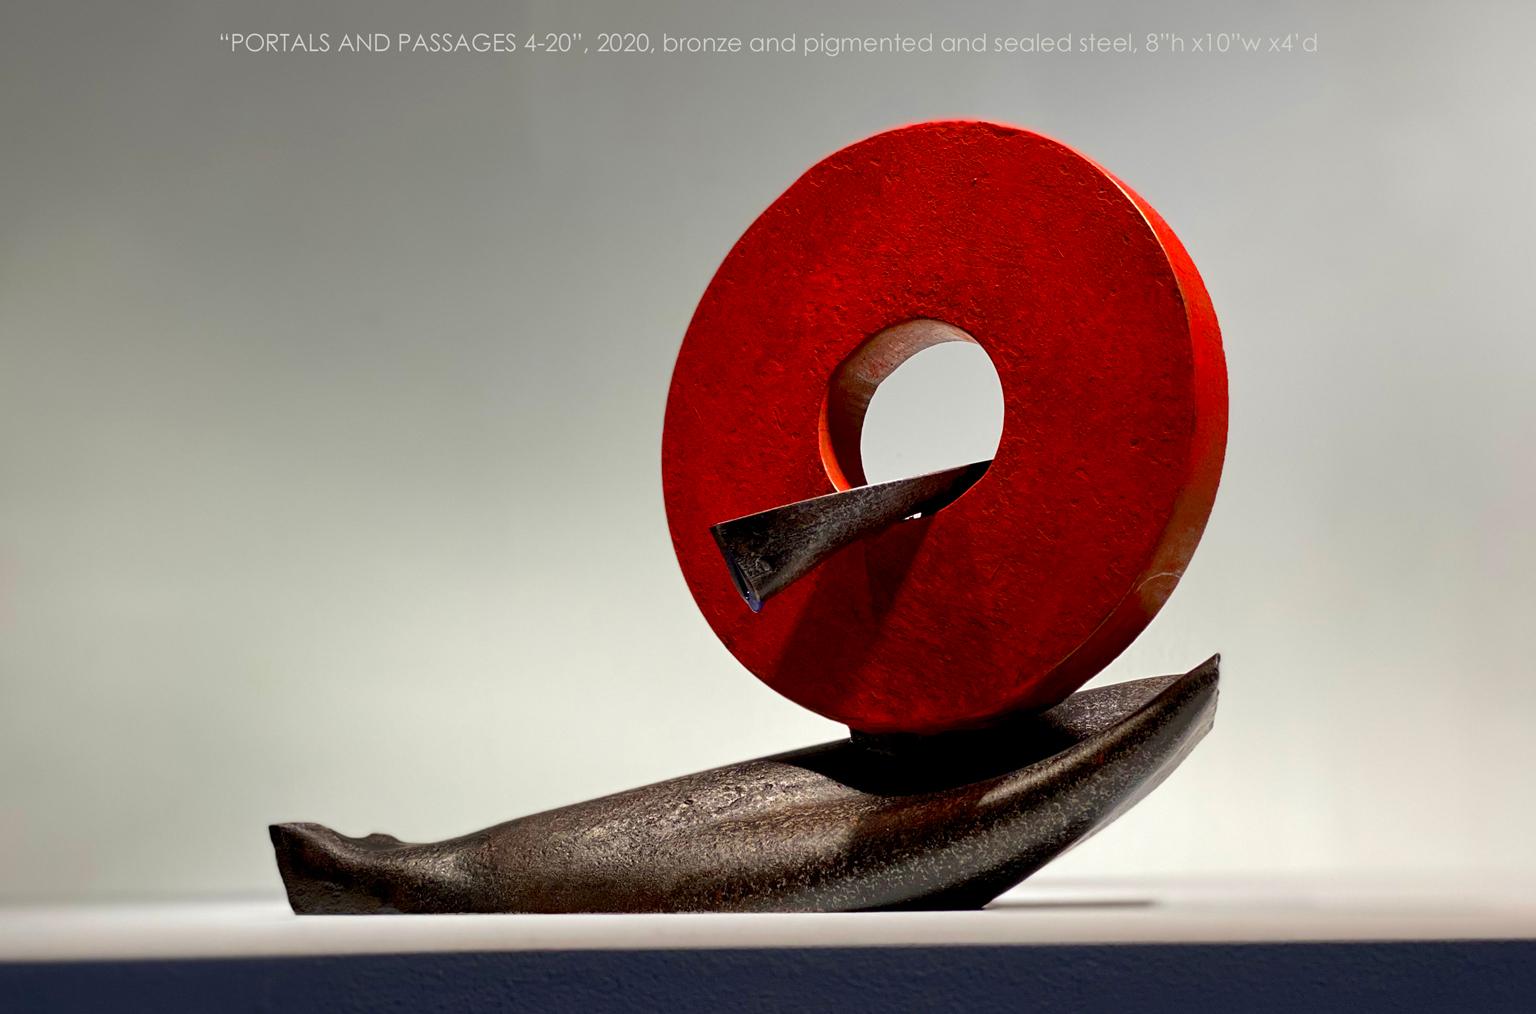 "PORTALS AND PASSAGES 4-20" by John Van Alstine
Bronze, pigmented and sealed steel

The sculpture of John Van Alstine beautifully, and powerfully, balances the union of stone and metal, while exploring the relationship of the purely natural and the